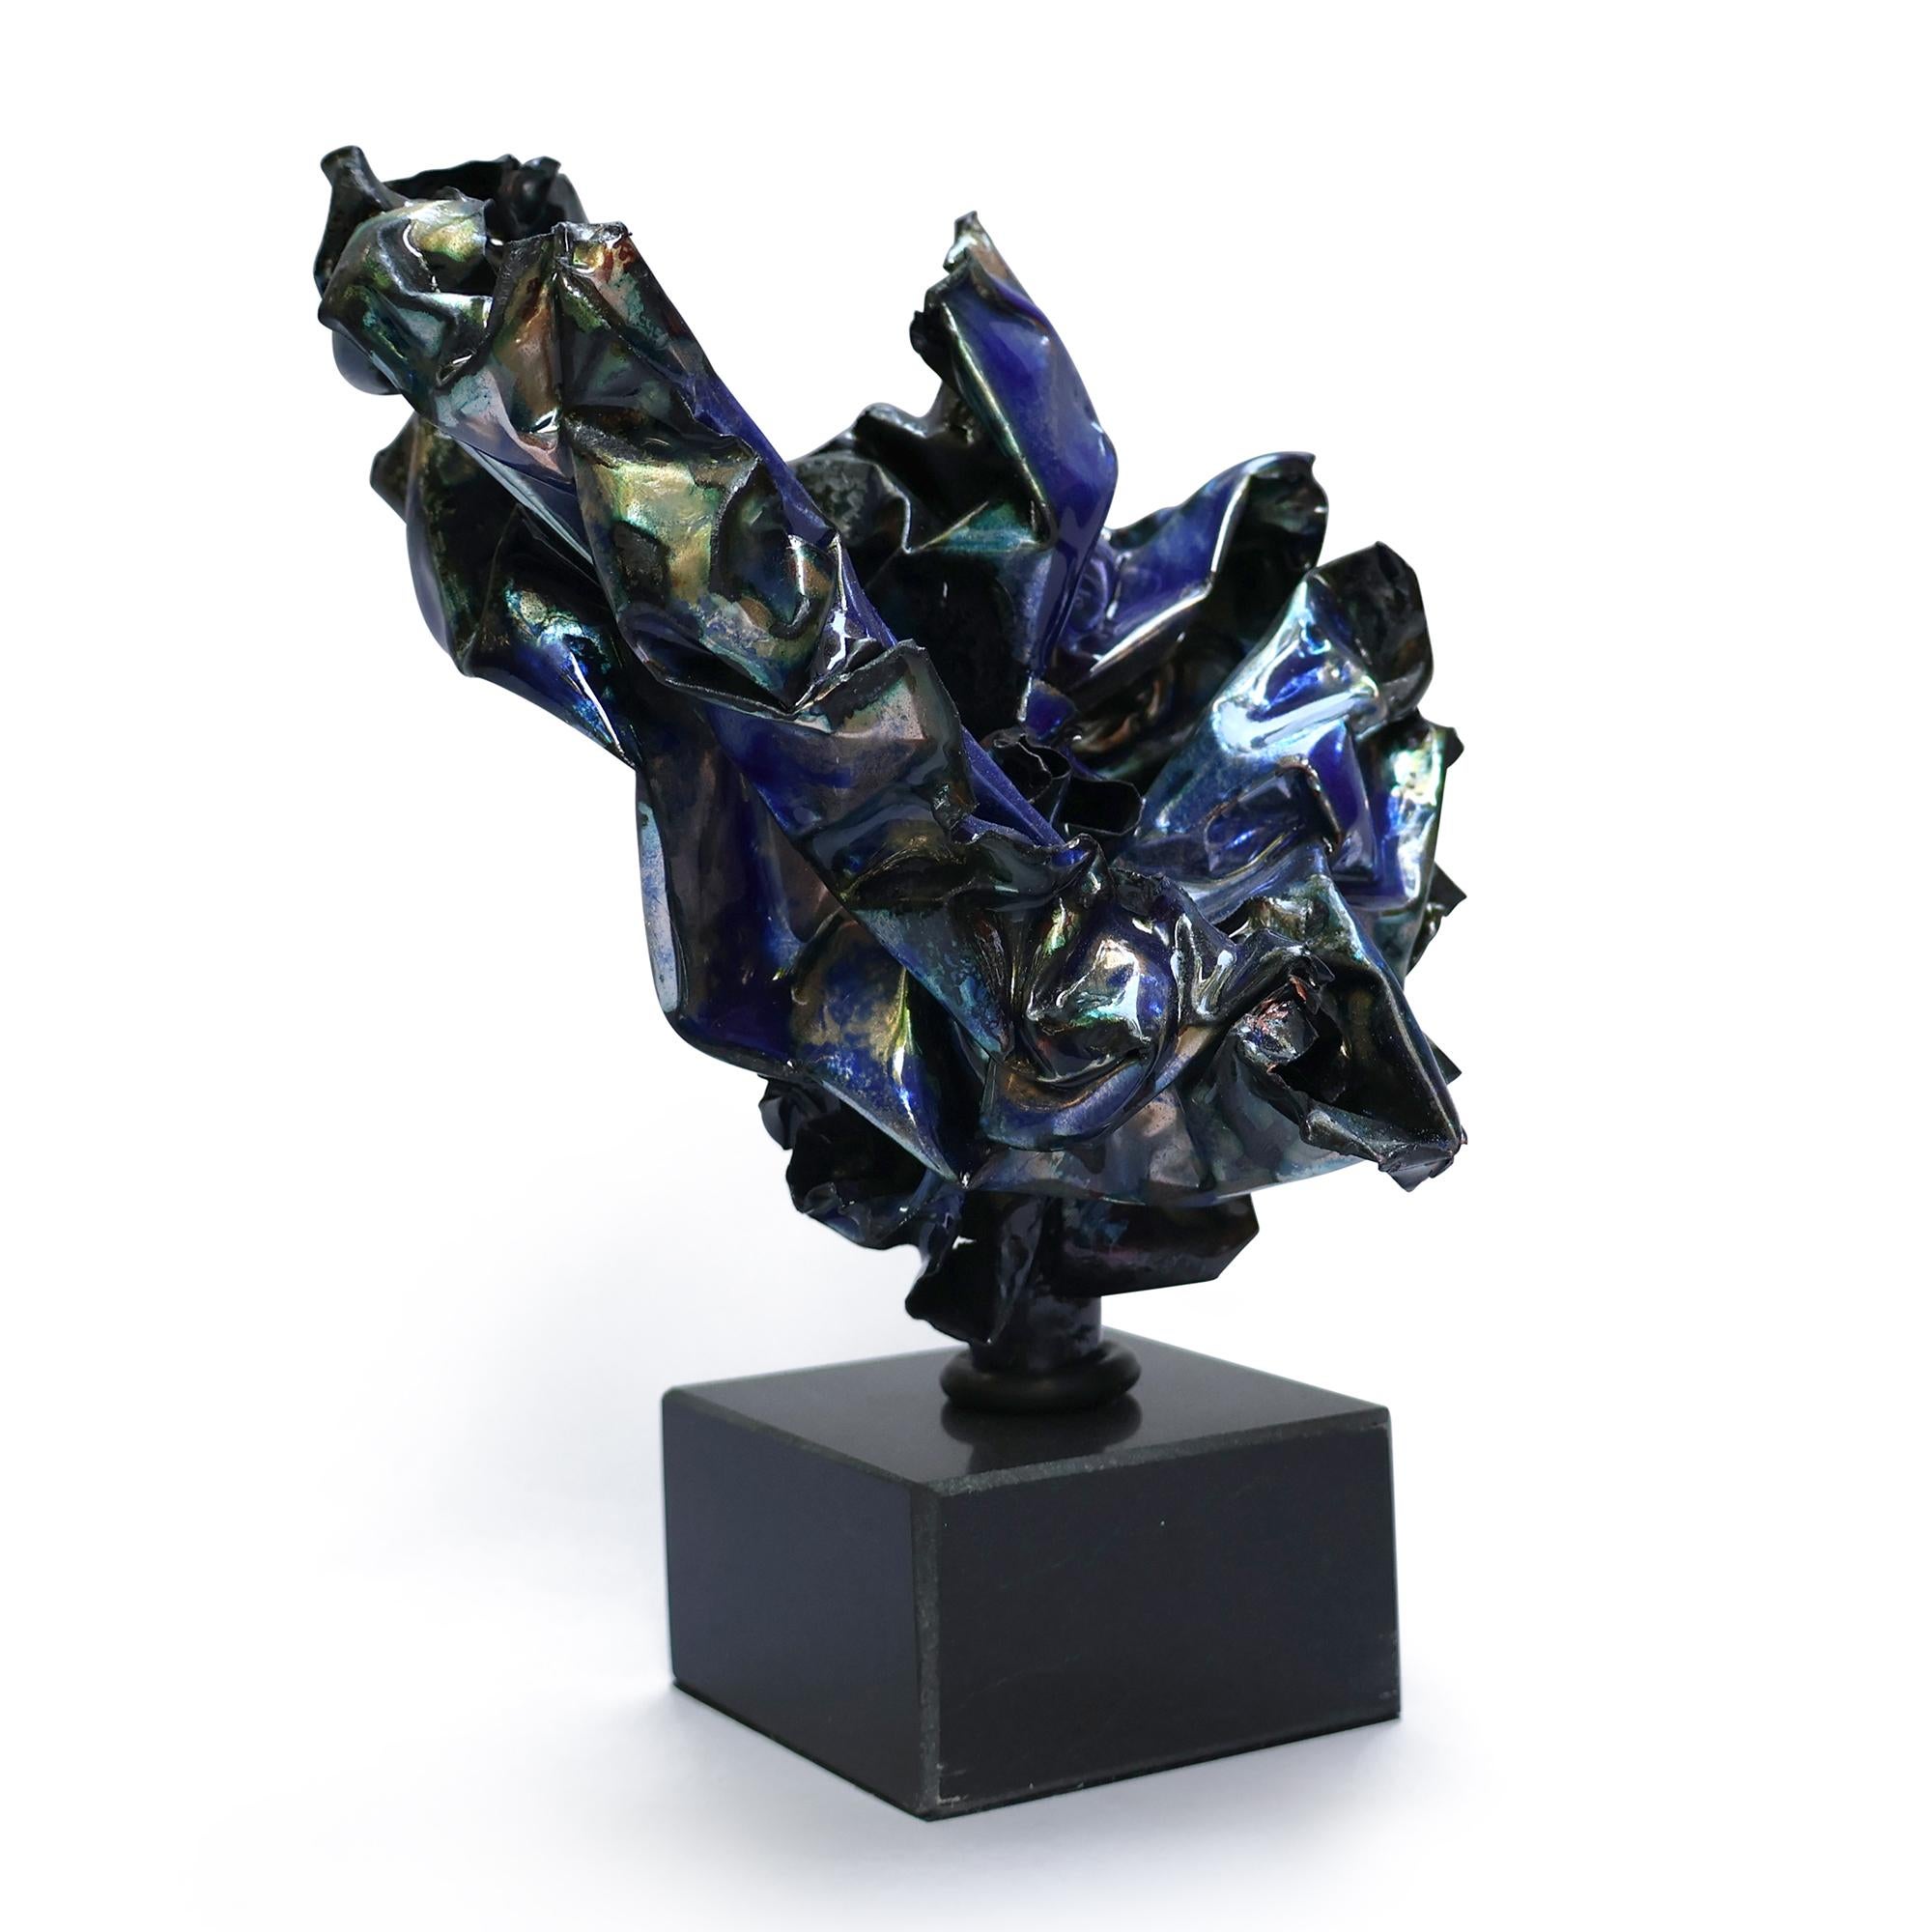 This sculpture features rich blue hues blending with greens and copper, creating a visually captivating abstract artwork.  The enamel finish gives it a liquid-like luminescence.   There is a base layer of soft glass that separates during the firing